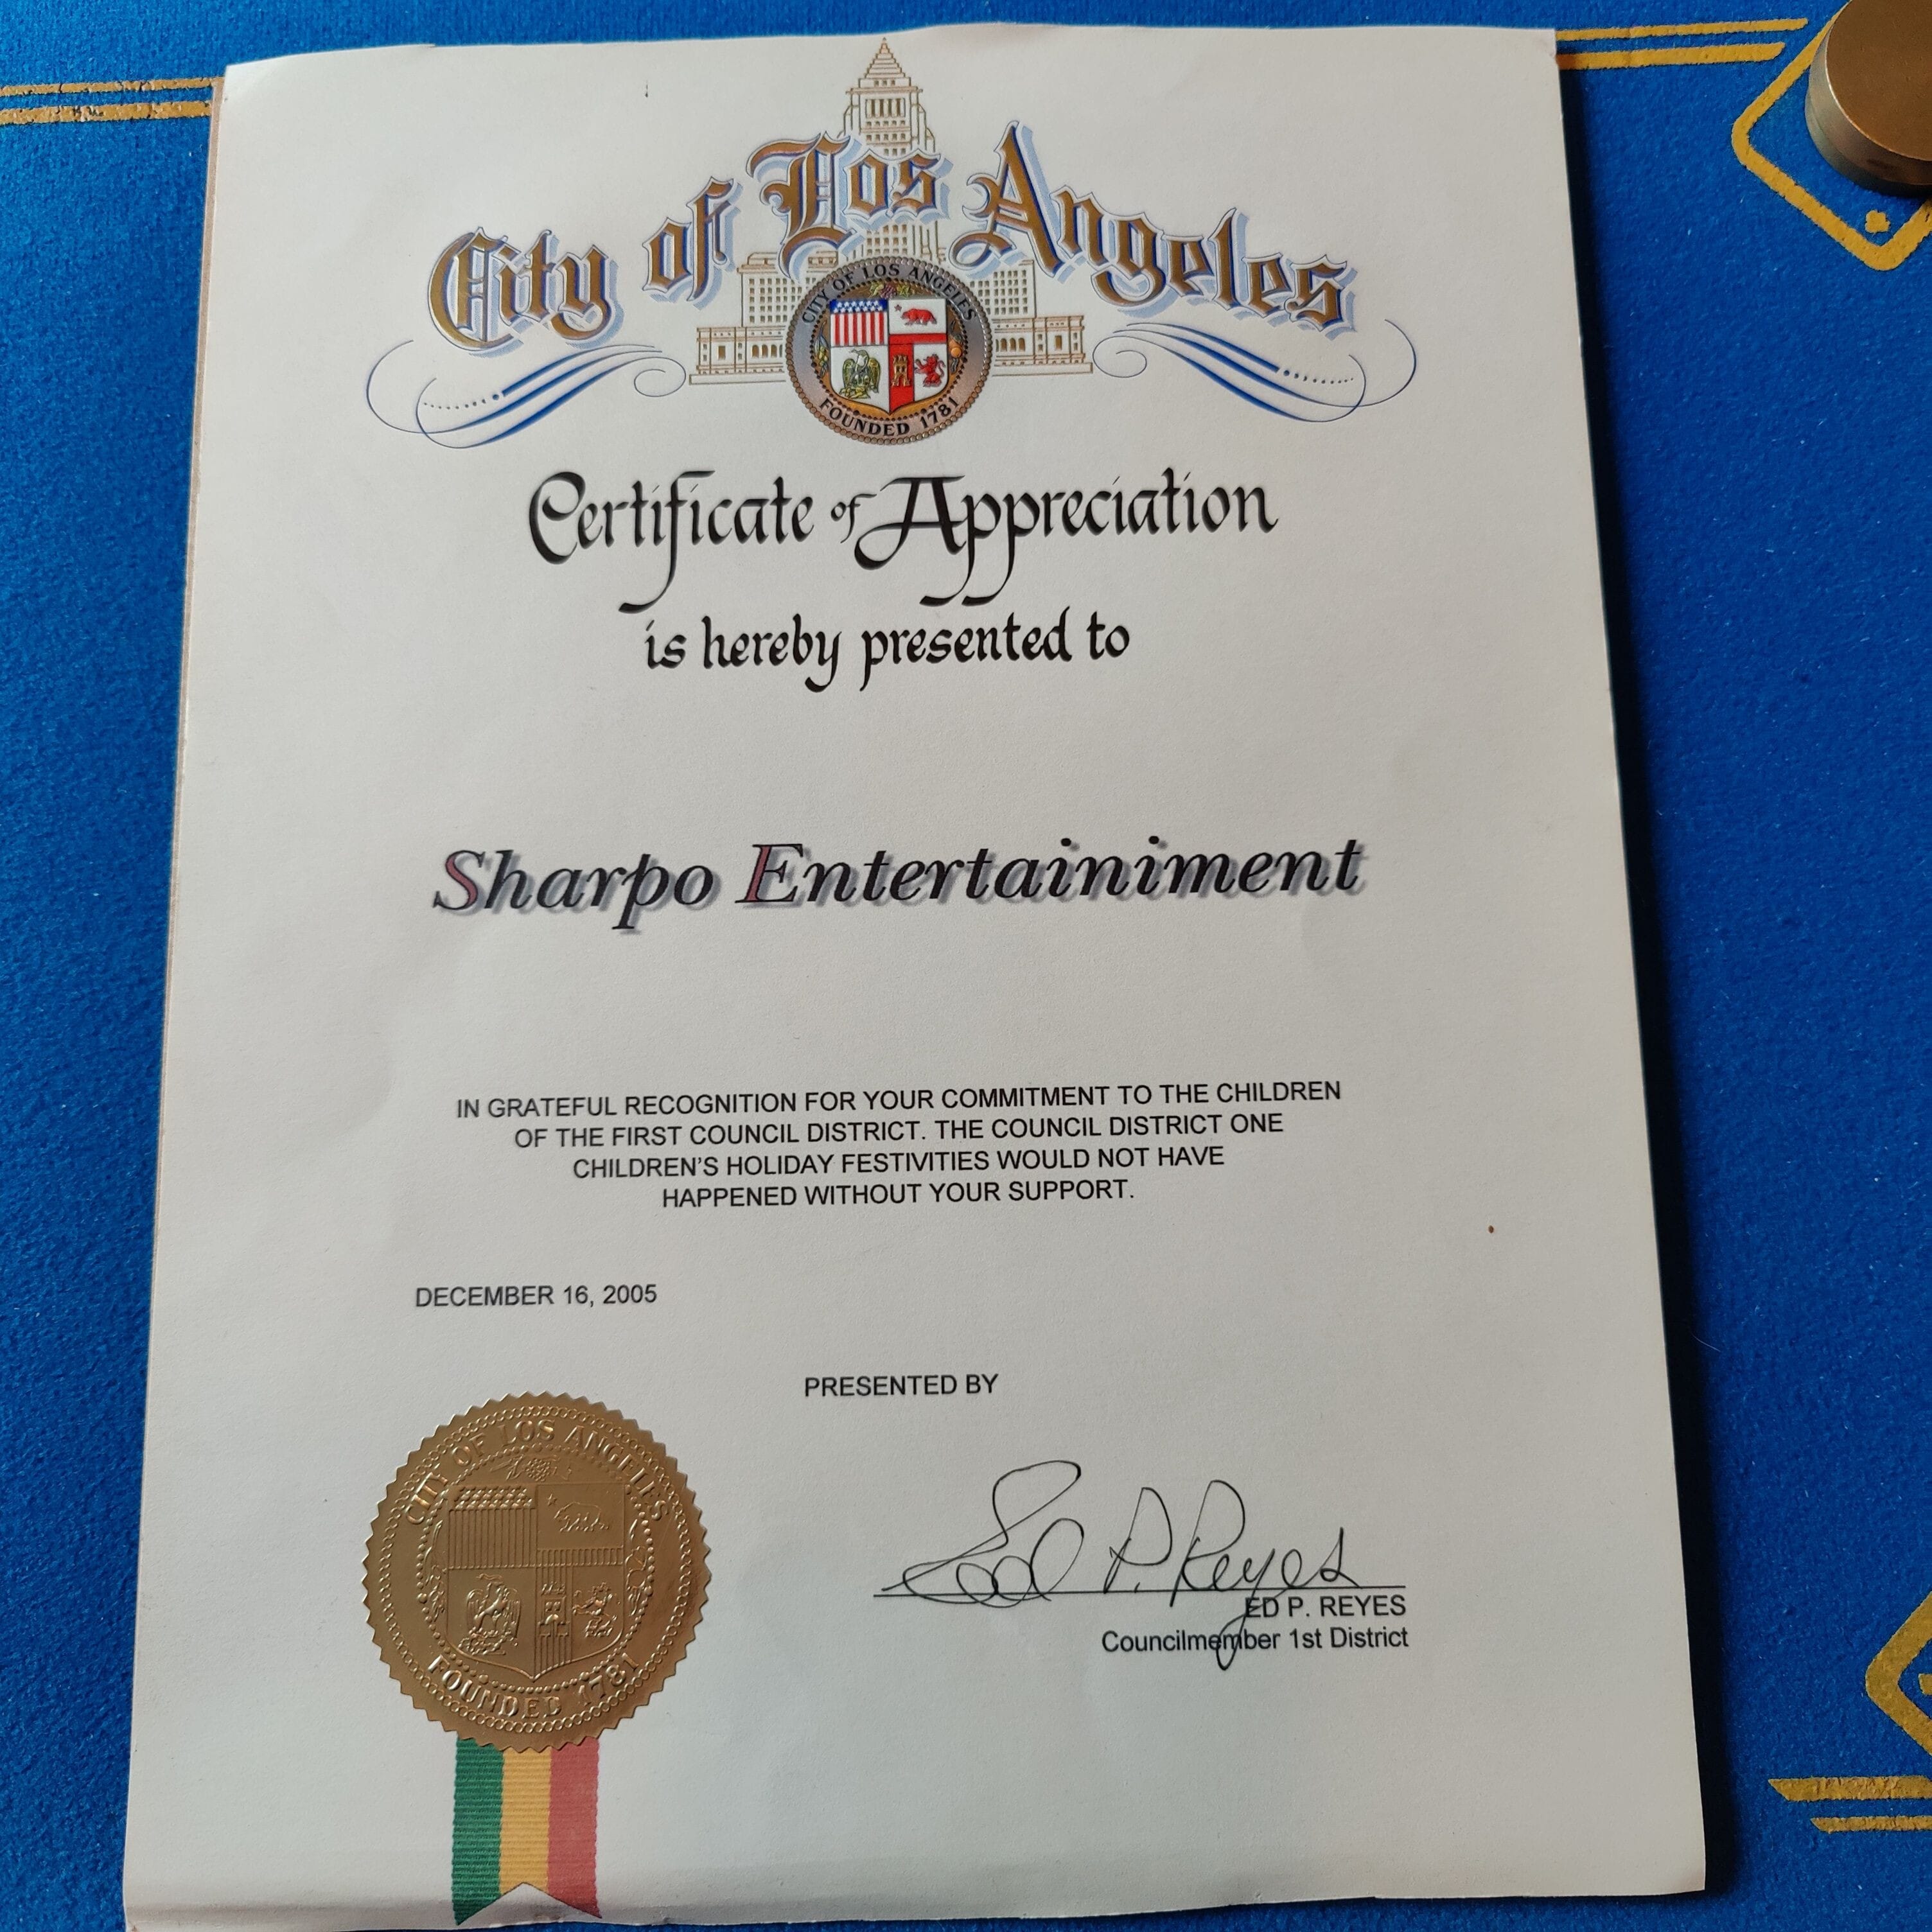 Certificate of Appreciation from the CIty of Los Angeles for Sharpo's charity children's magic show 2005